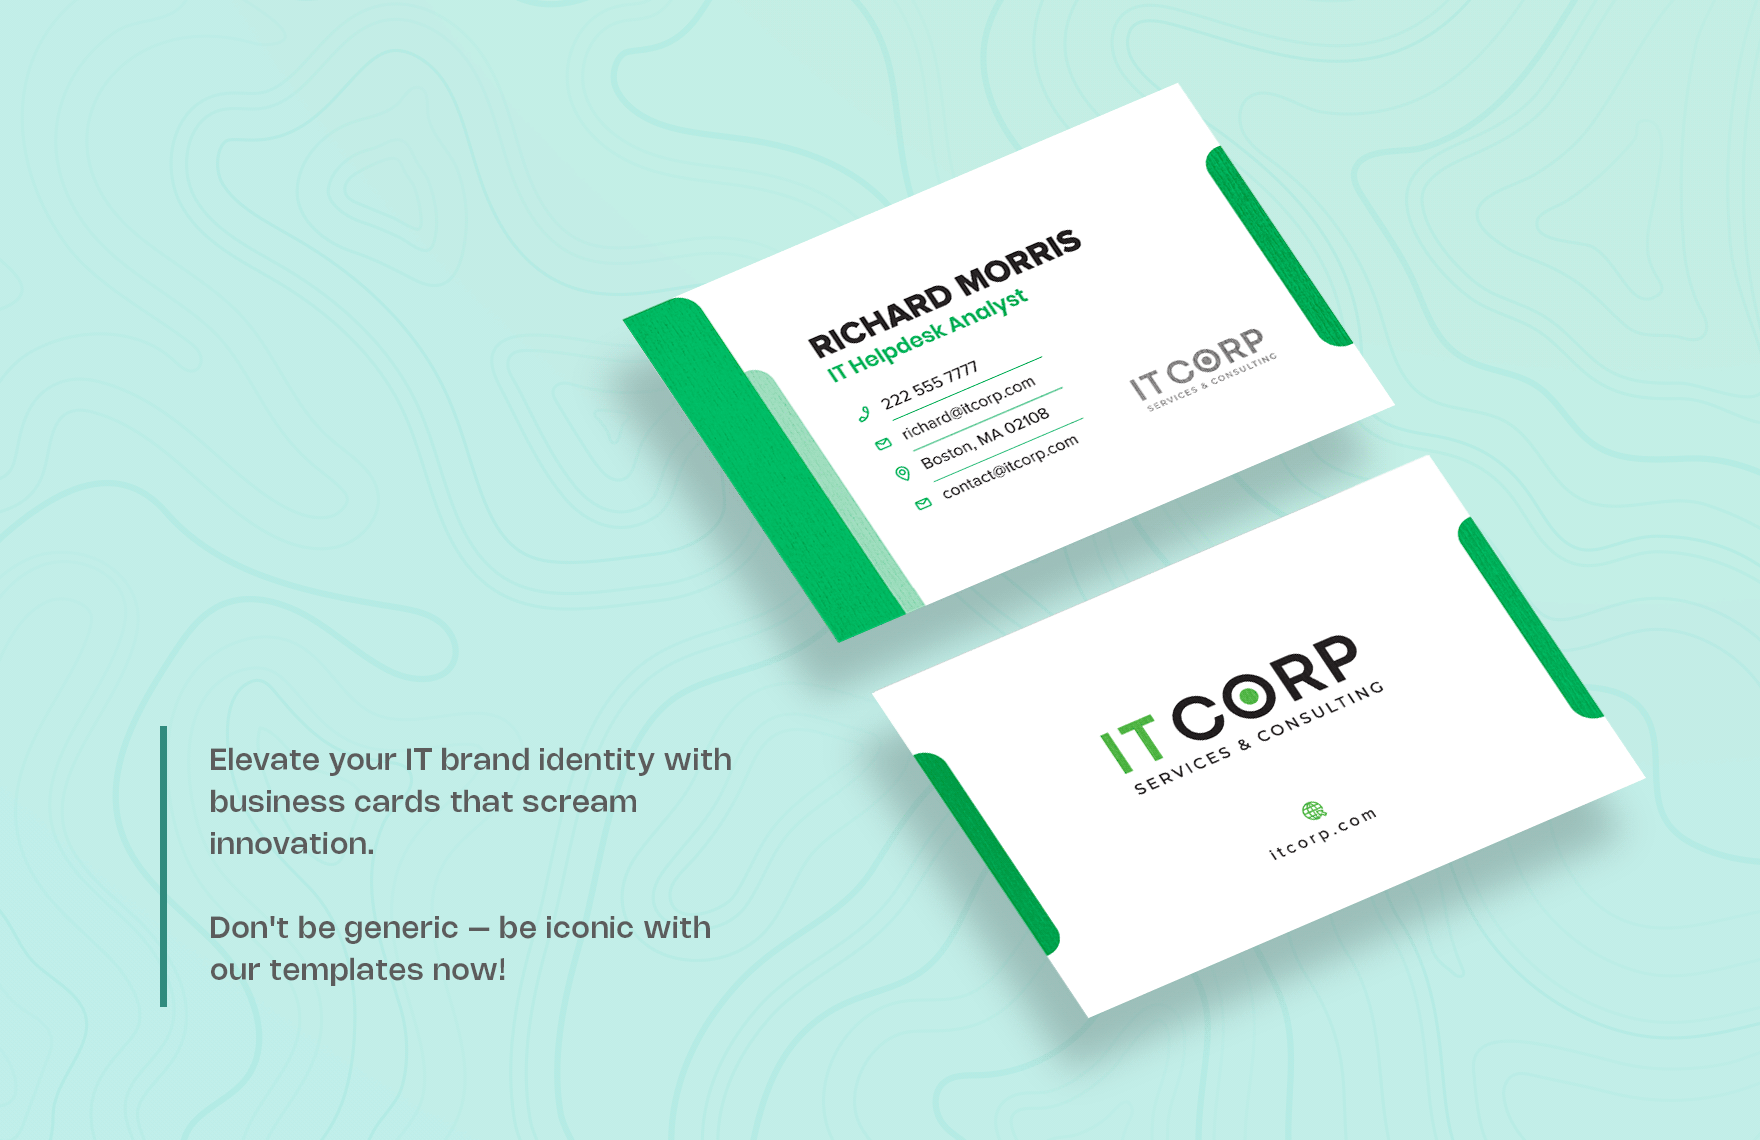 Managed IT Services Business Card Template